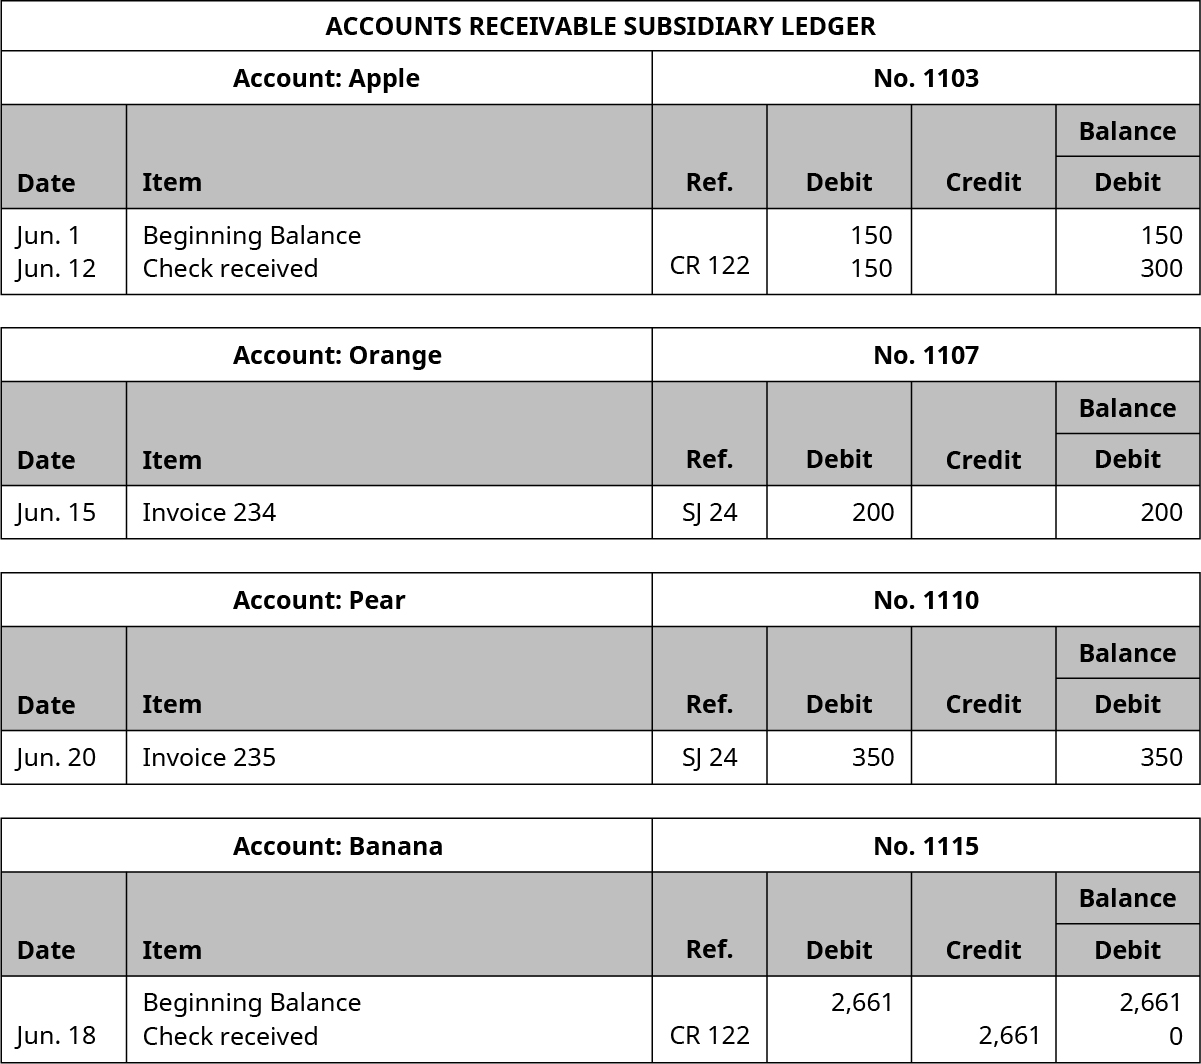 Accounts Receivable Subsidiary Ledger. Six Columns, labeled left to right: Date, Item, Reference, Debit, Credit, Balance. Apple Account, Number 1103. Line One: June 1; Beginning Balance; Blank; 150; Blank; 150. Line Two: June 12; Check Received; CR 122; 150; Blank; 300. Orange Account, Number 1107. Line One: June 15; Invoice 234; SJ 24; 200; Blank; 200. Pear Account, Number 1110. Line One: June 20; Invoice 235; SJ 24; 350; Blank; 350. Banana Account, Number 1115. Line One: Blank, Beginning Balance; Blank; 2,661; Blank; 2,661. Line Two: June 18; Check Received; CR 122; Blank; 2,661; 0.